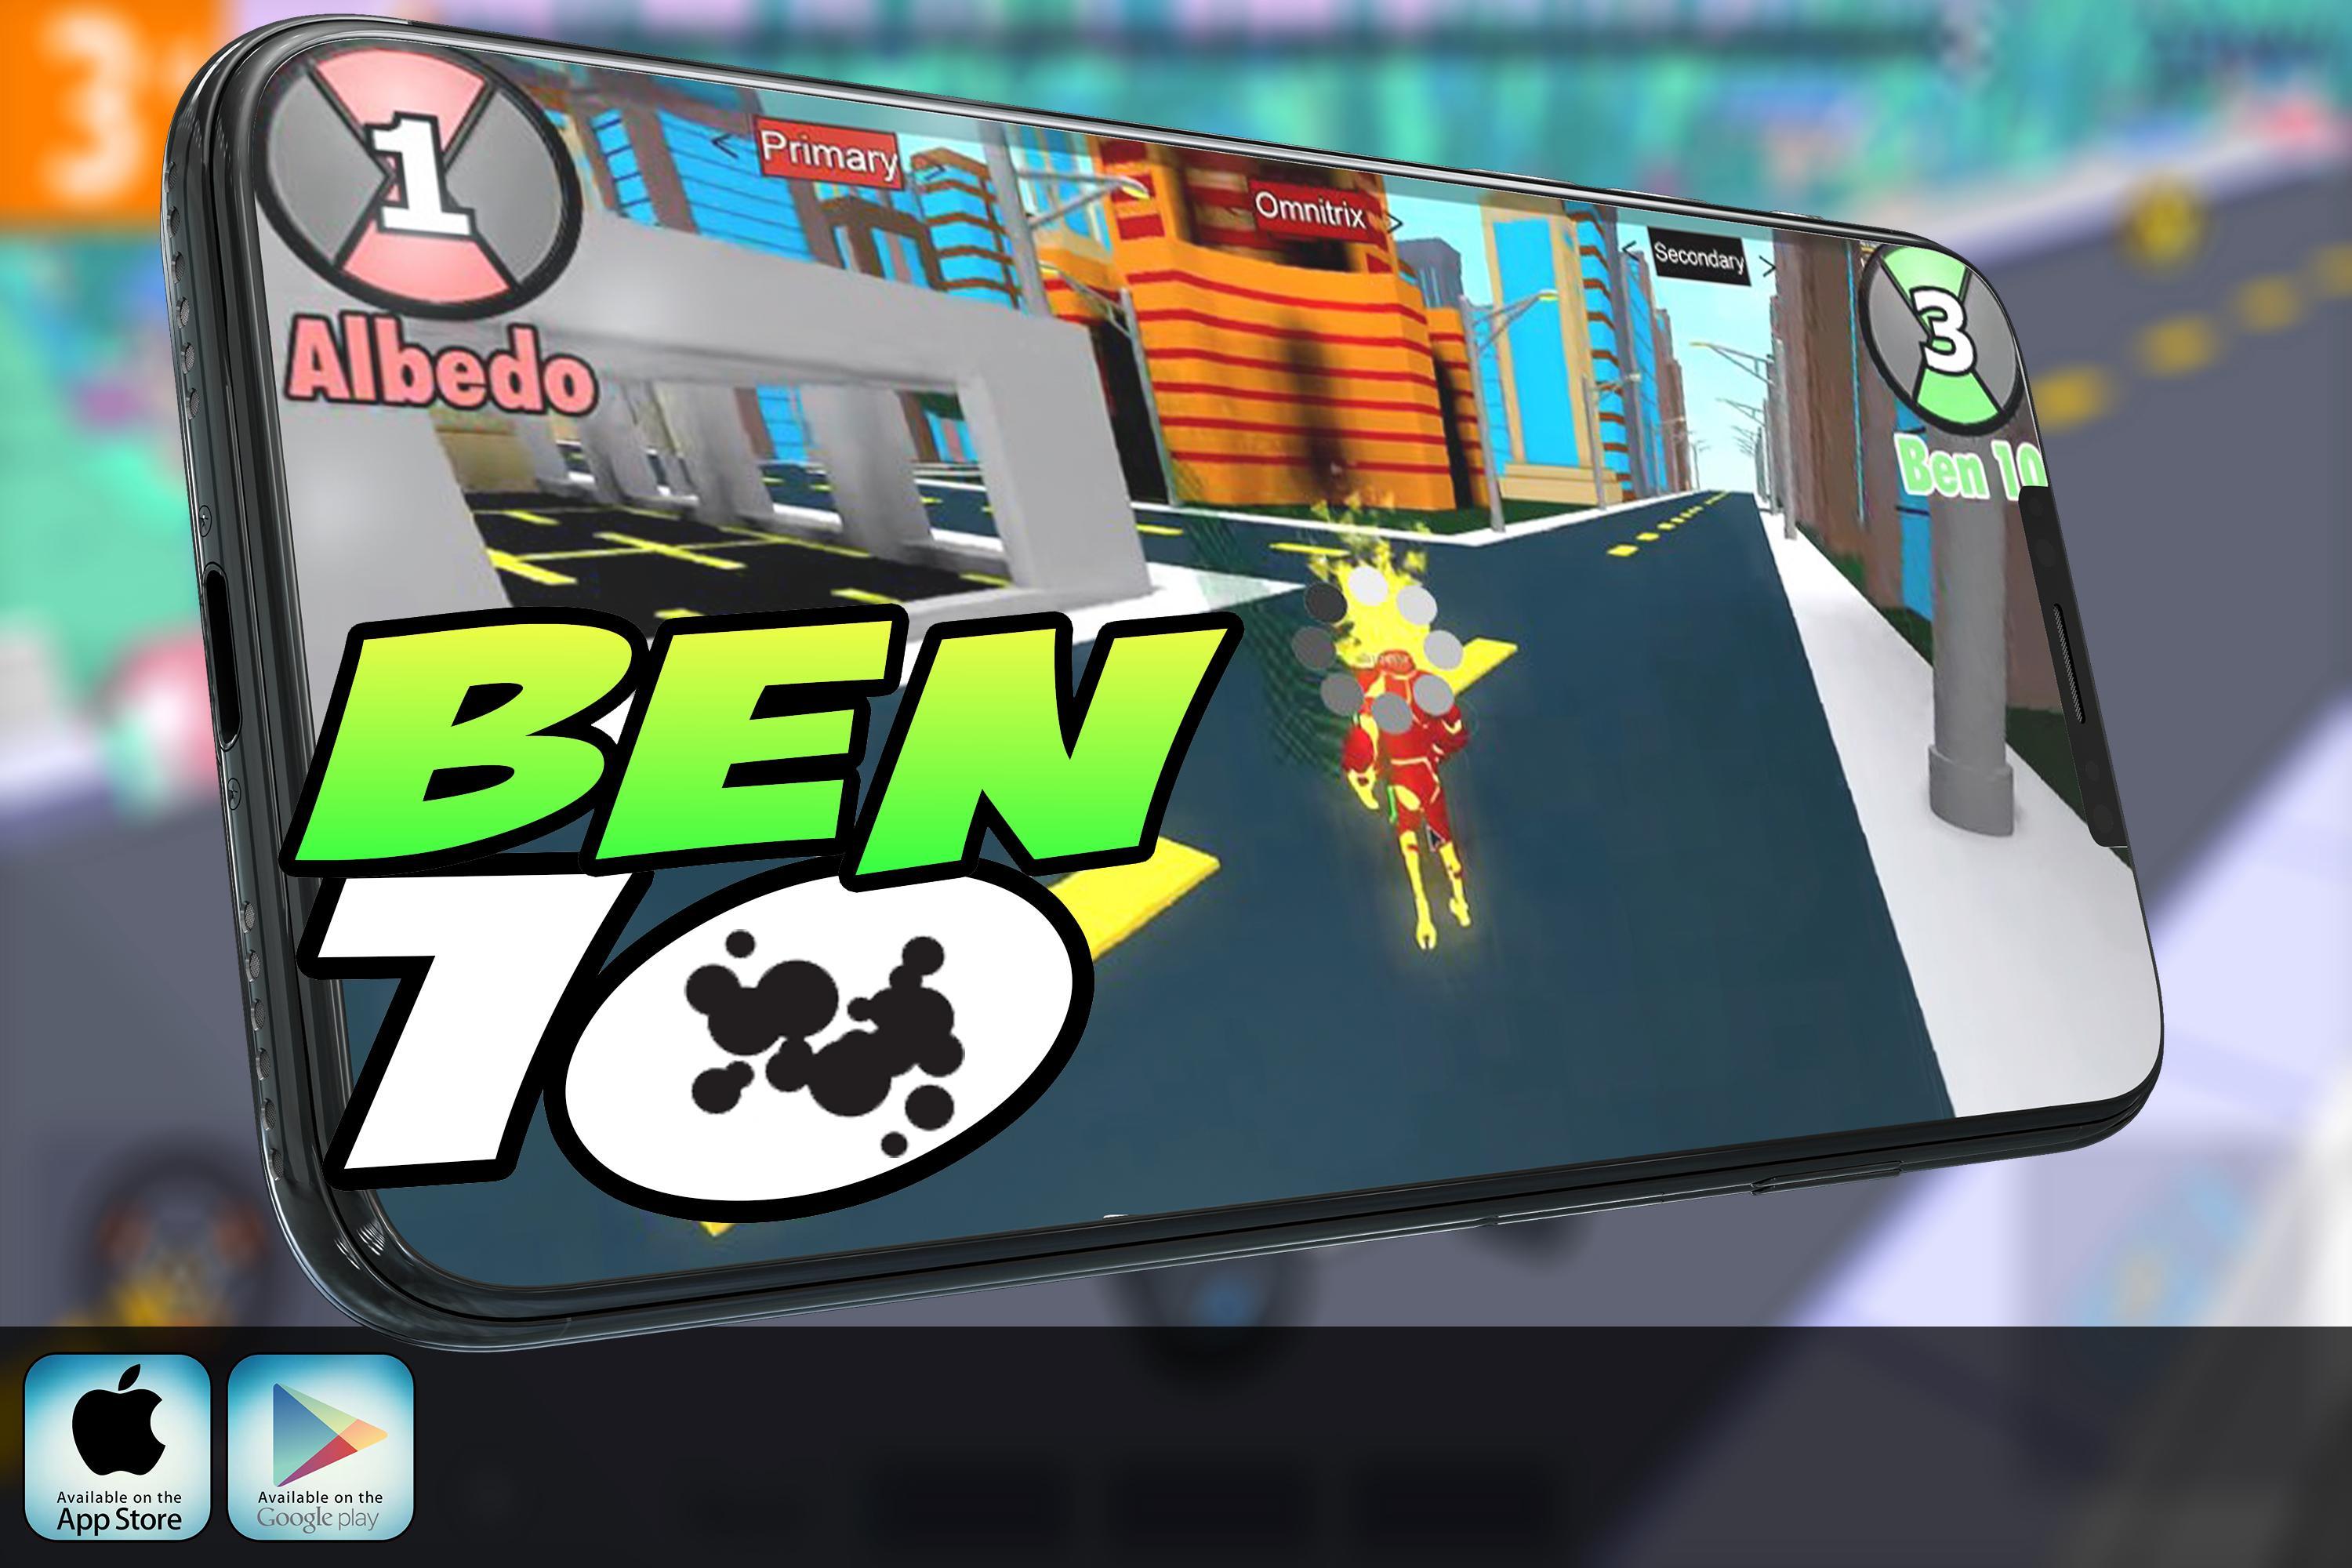 Tips For Evil Ben 10 Roblox For Android Apk Download - tips ben 10 evil ben 10 roblox guide for ben 10 evil